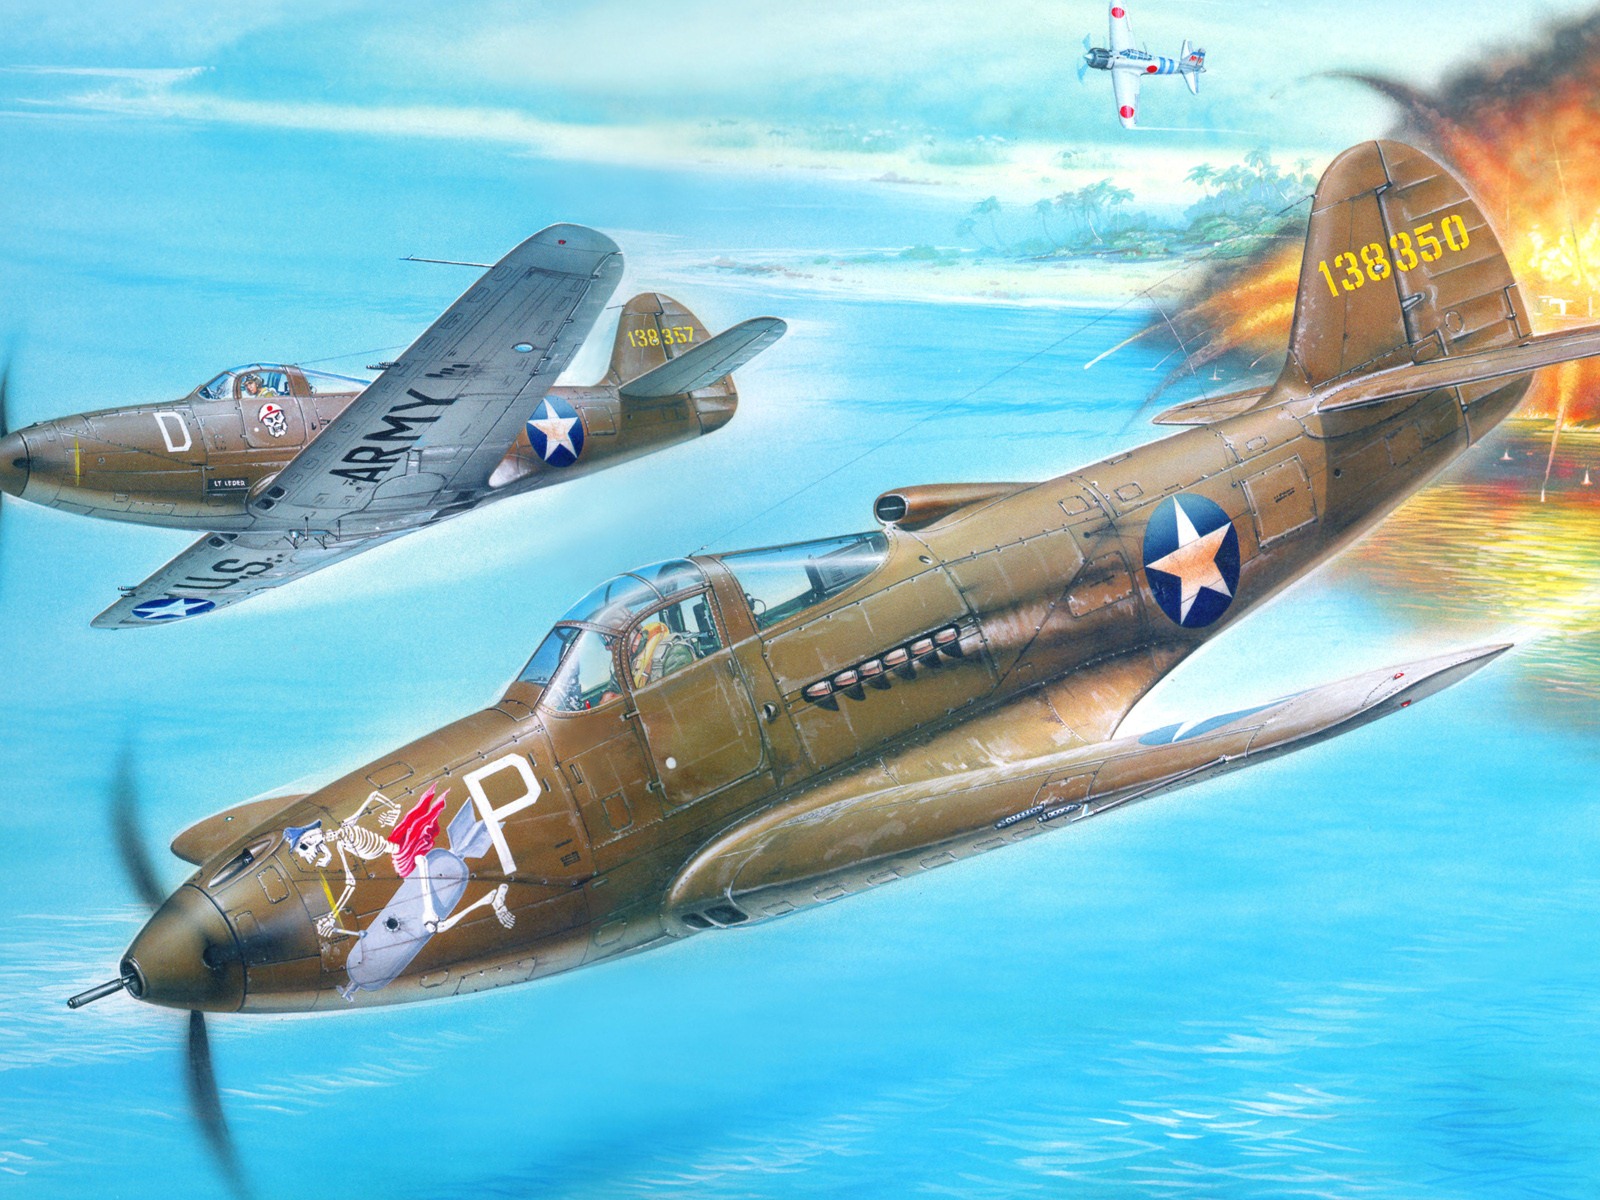 Military aircraft flight exquisite painting wallpapers #17 - 1600x1200